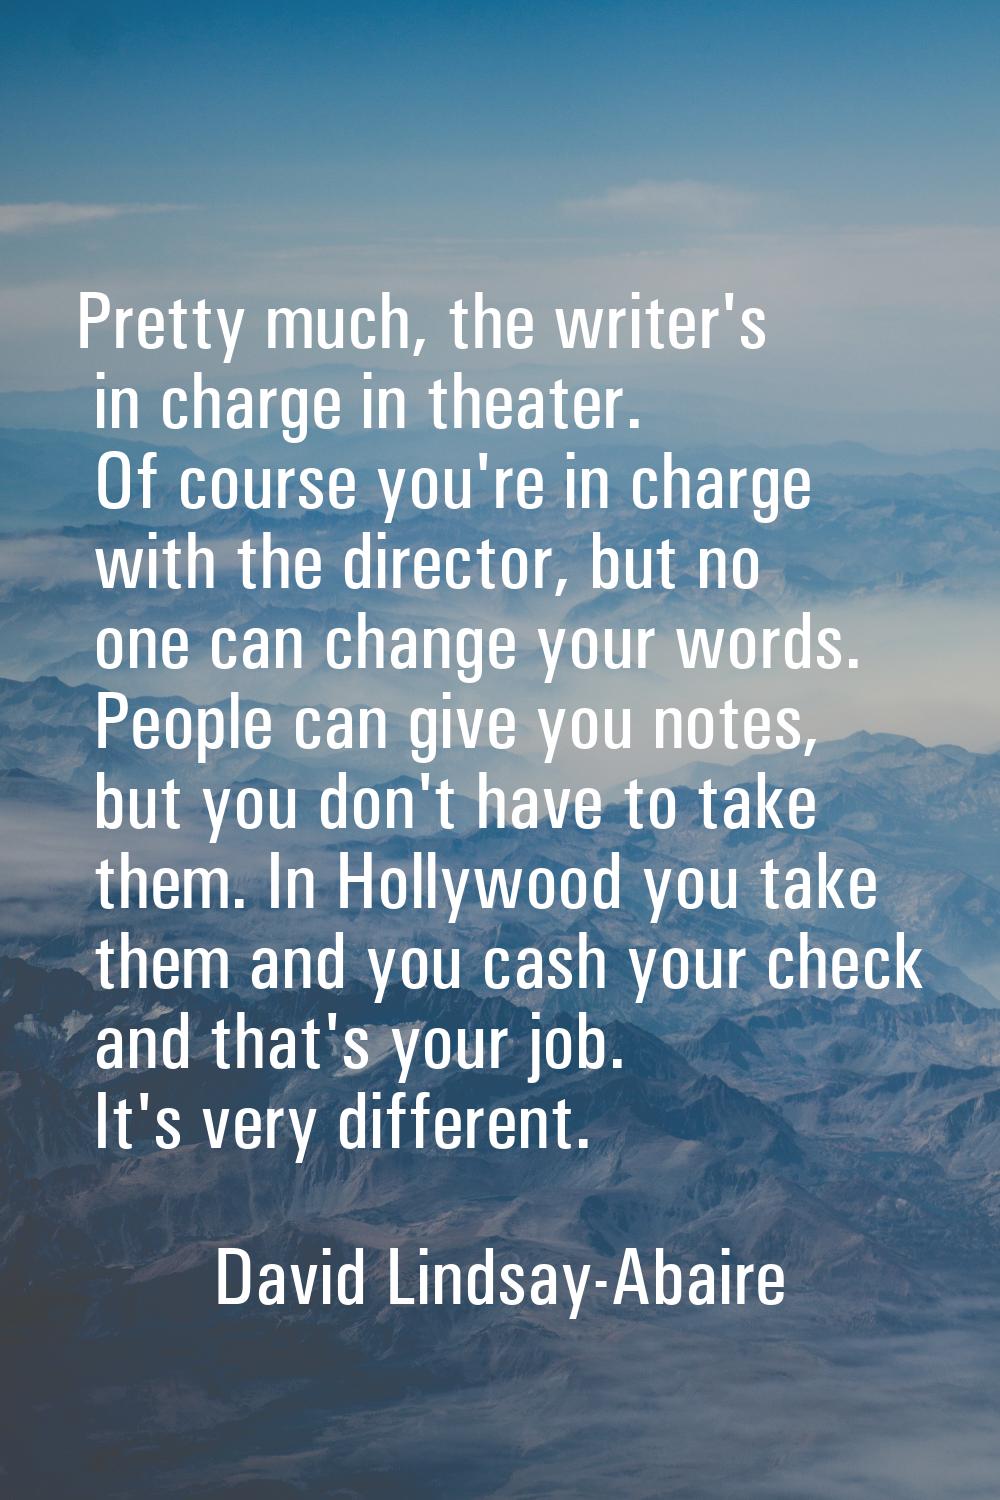 Pretty much, the writer's in charge in theater. Of course you're in charge with the director, but n